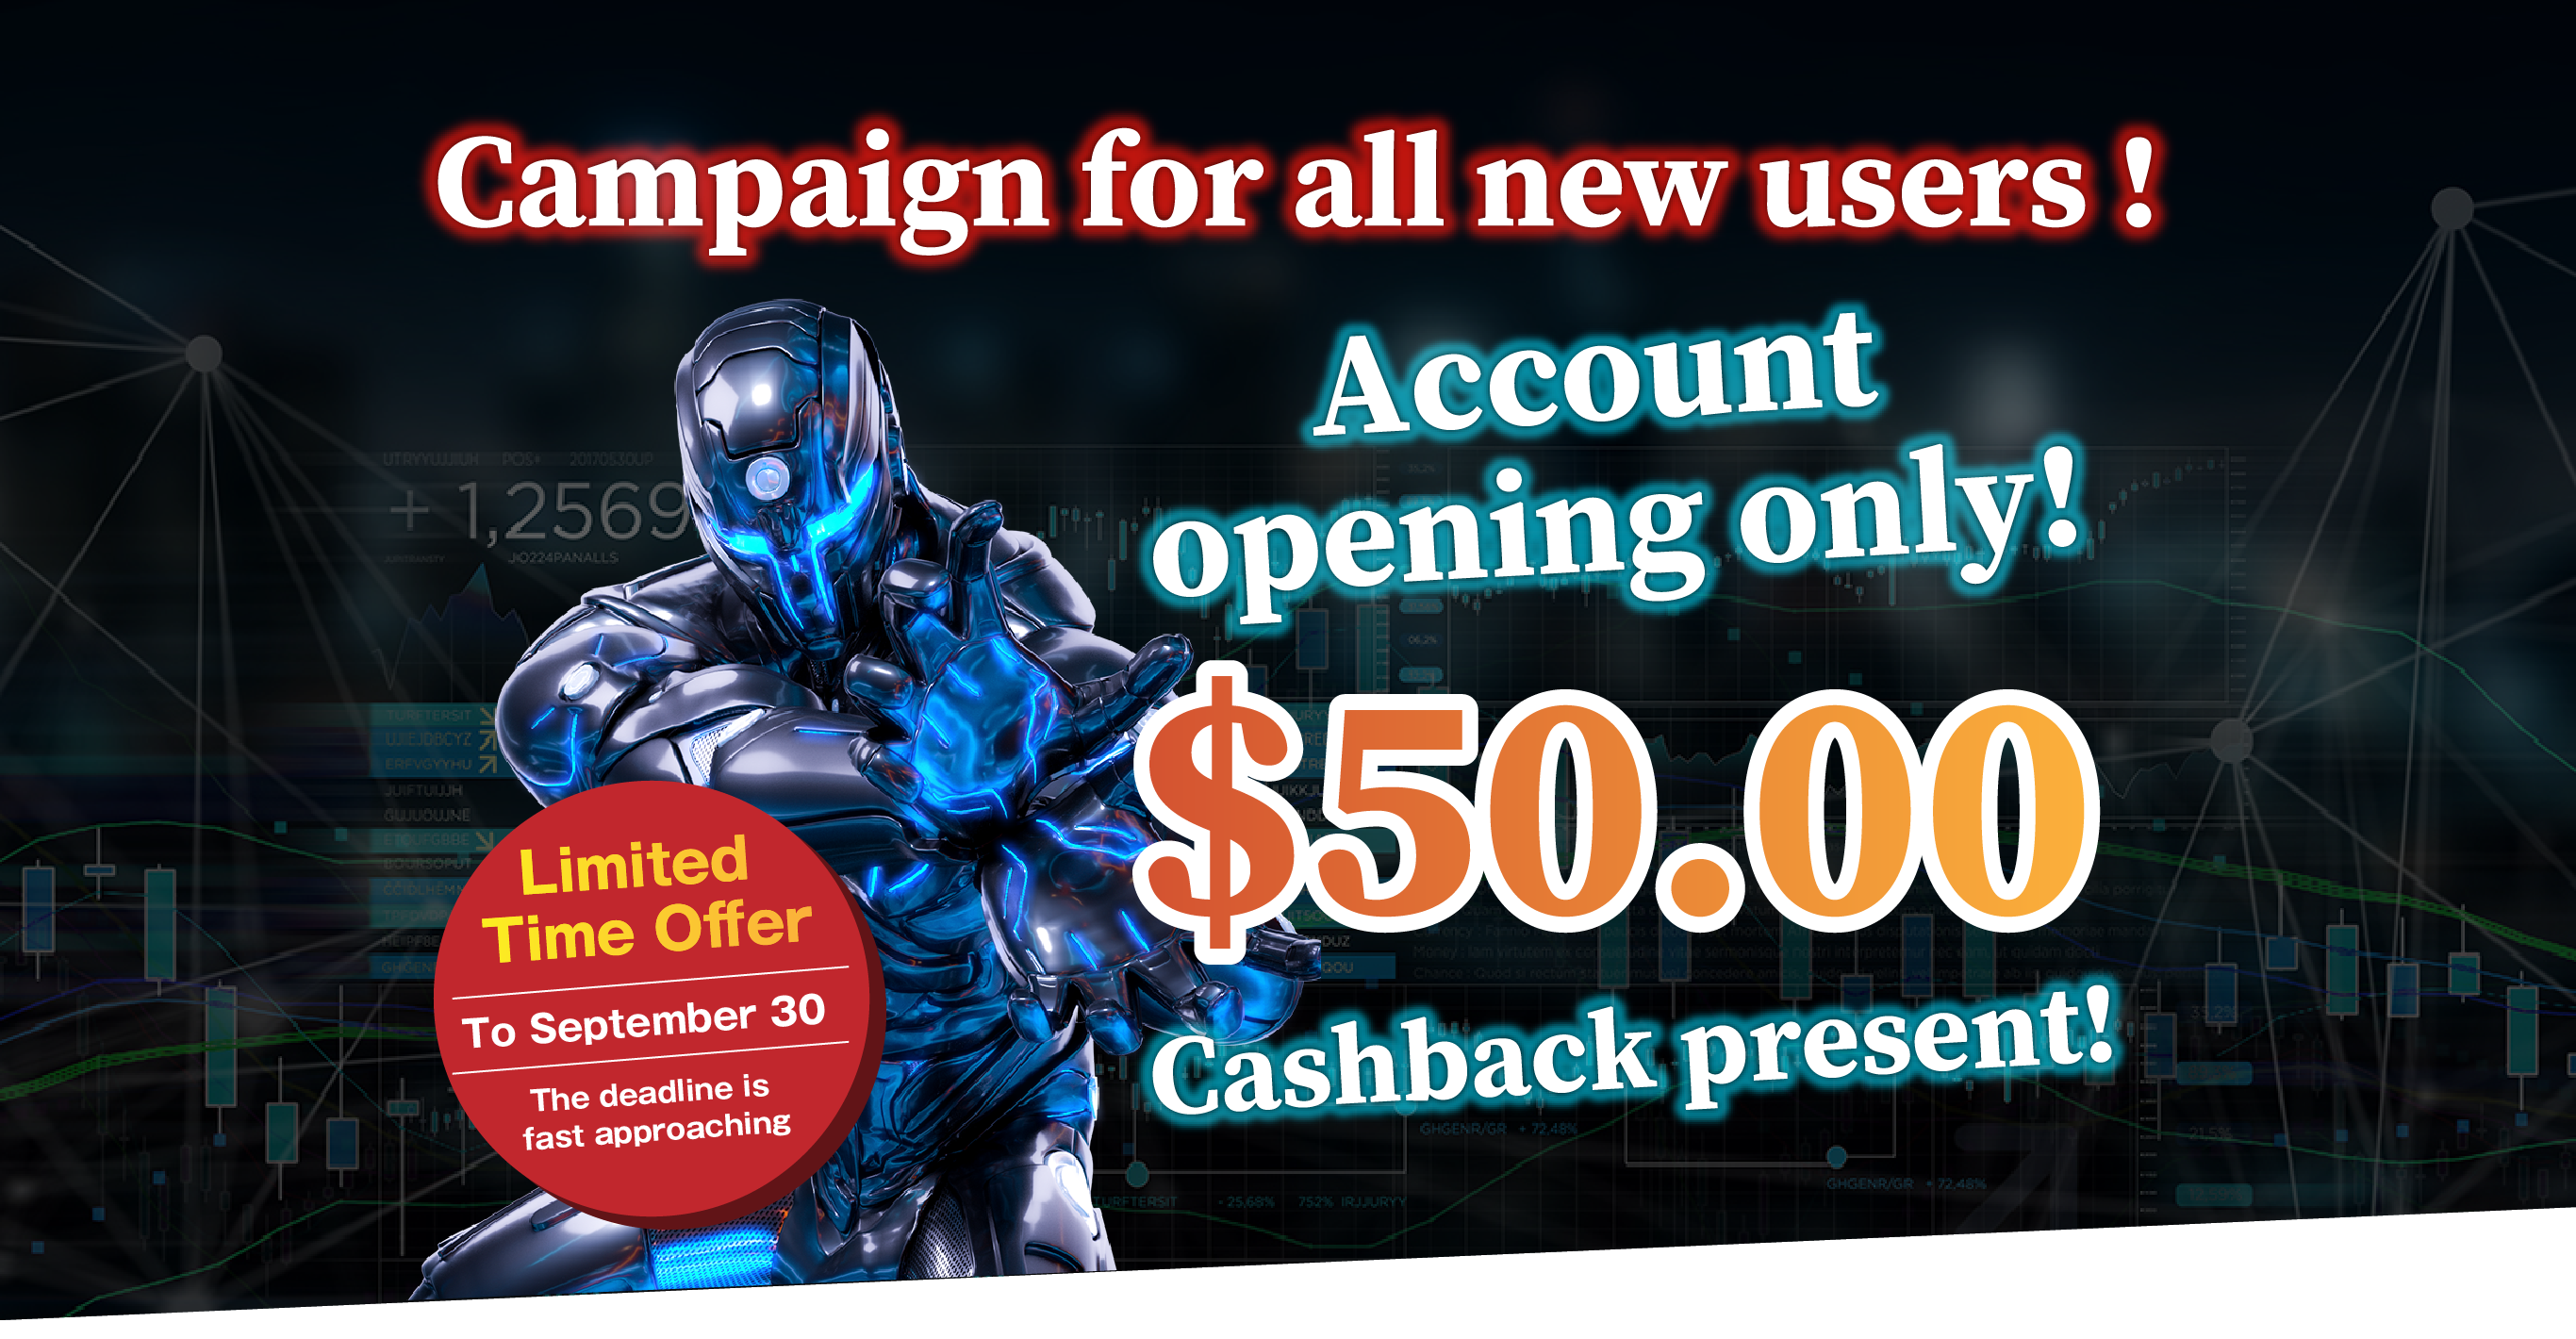 Account Opening Only! $50 Cash Bonus Campaign for all new customers!